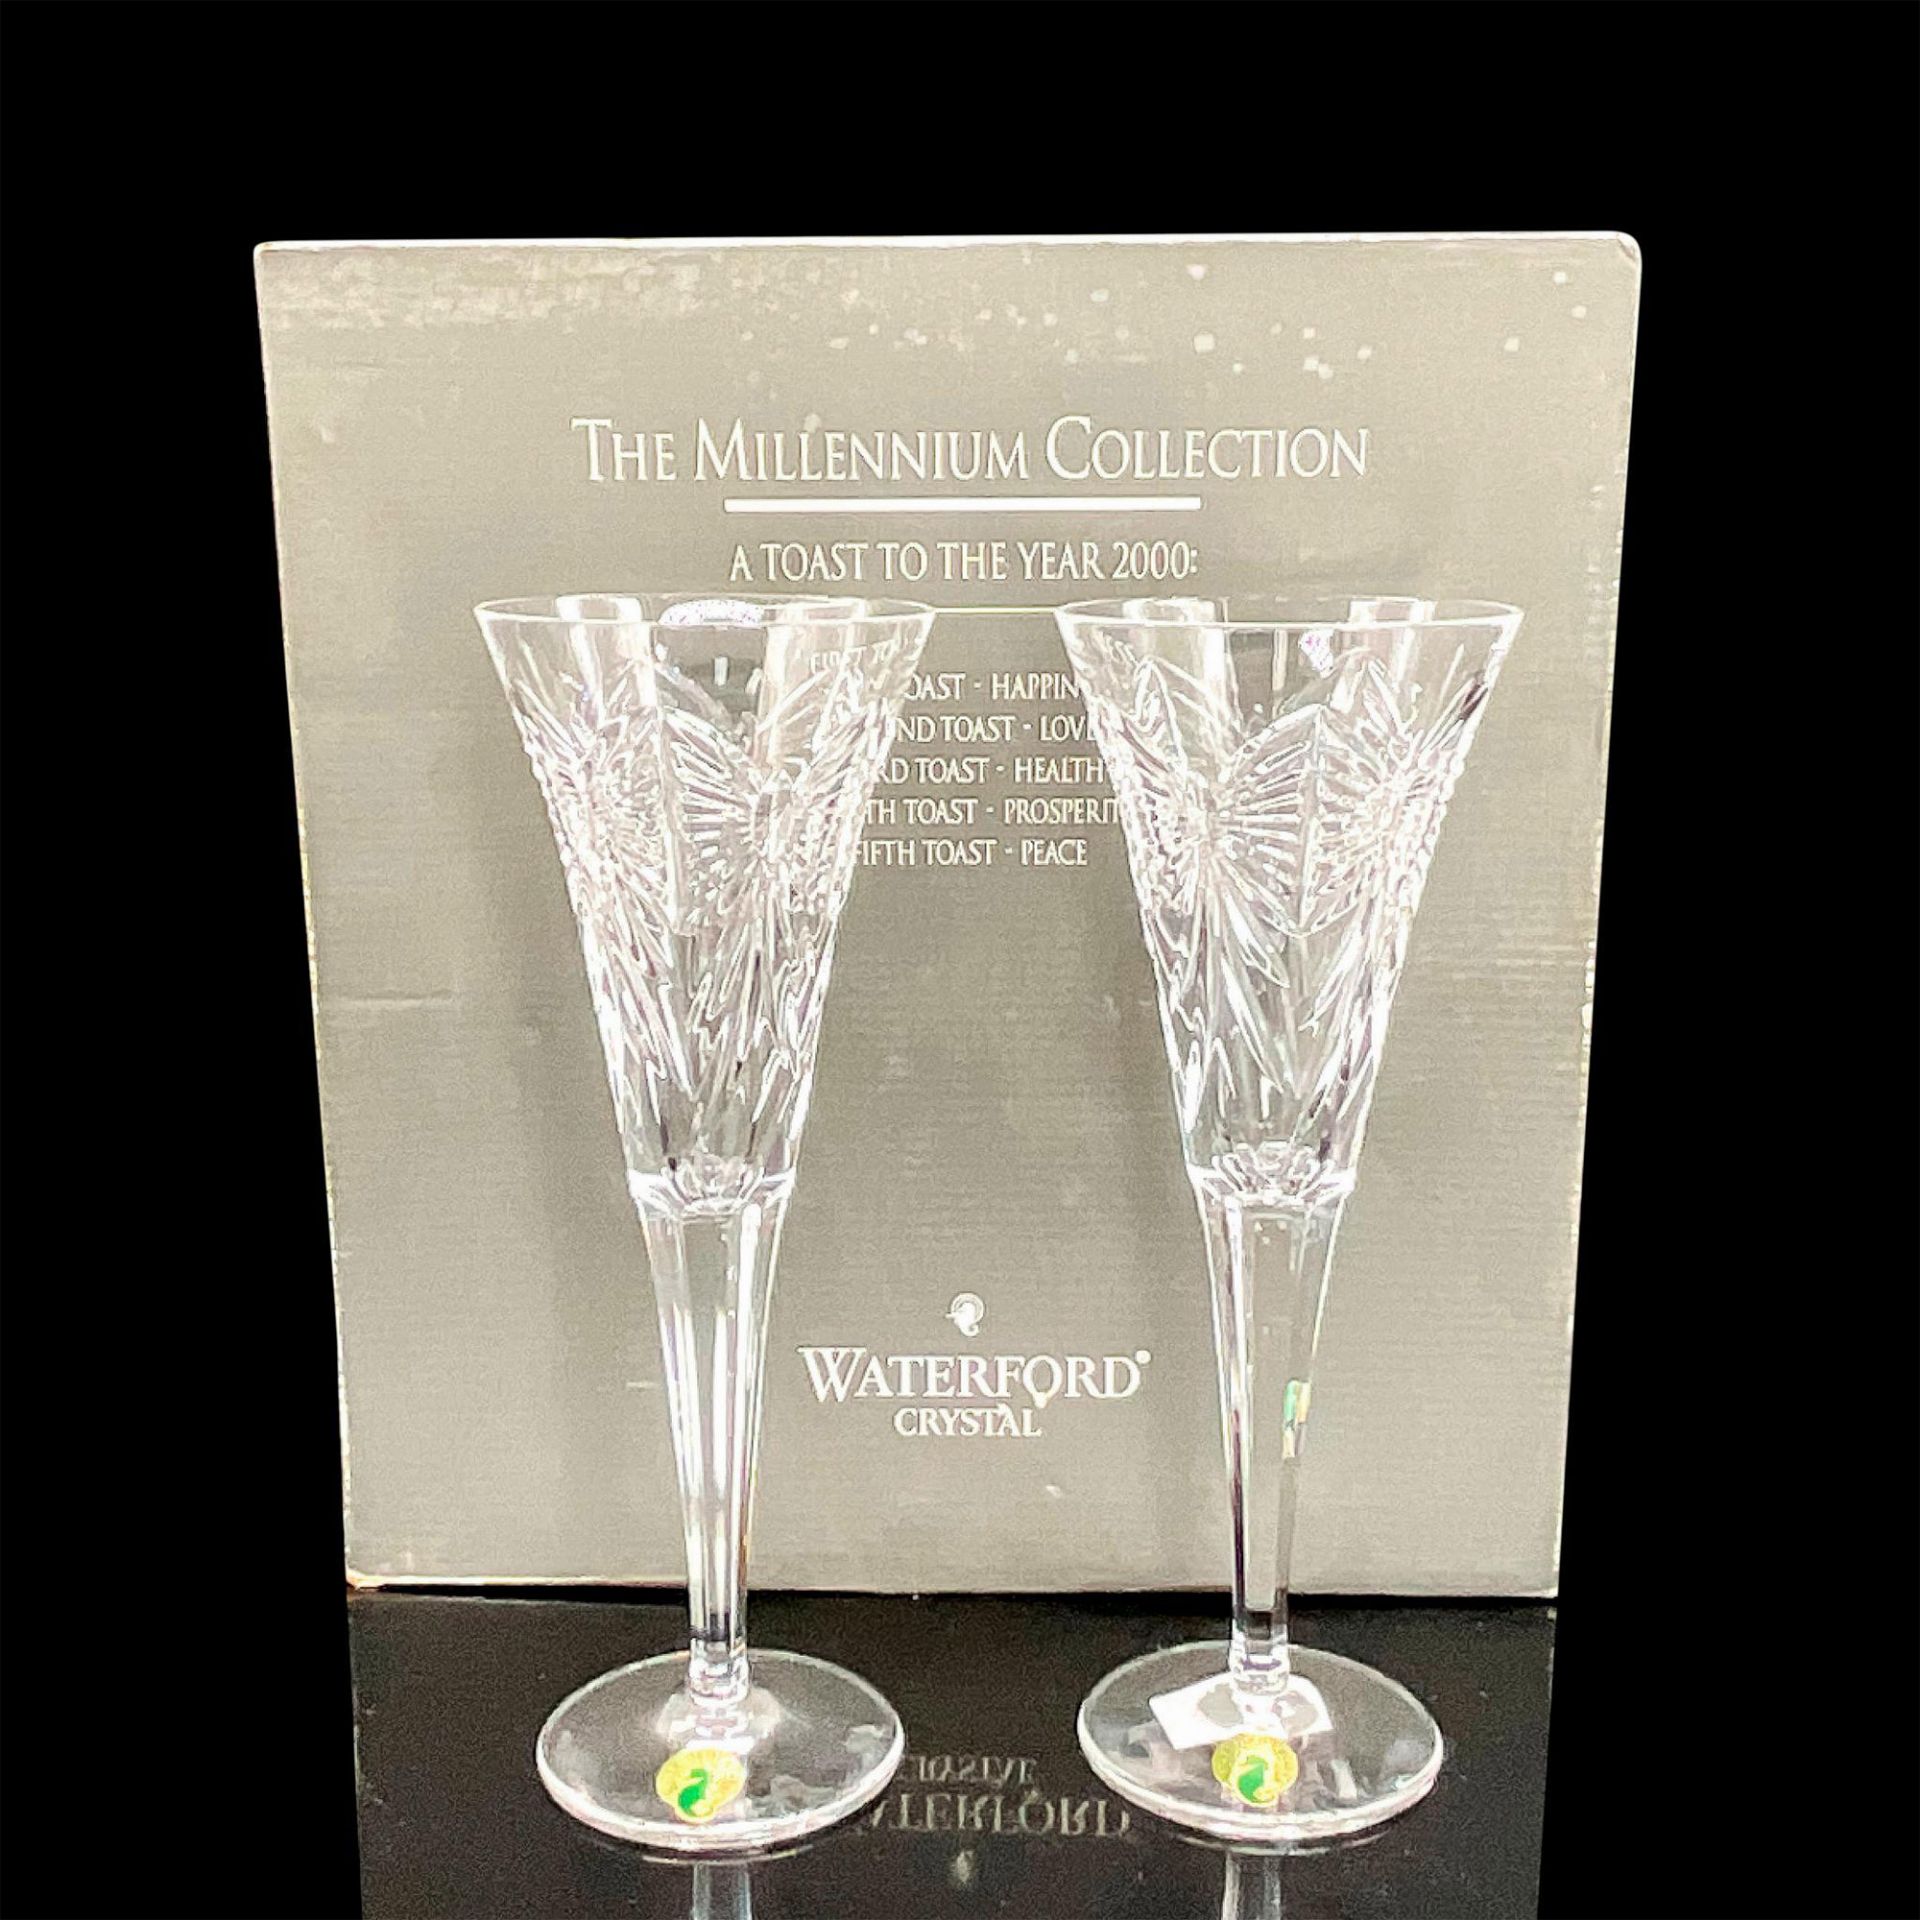 Waterford Crystal Millennium Collection Toasting Flutes - Image 4 of 4